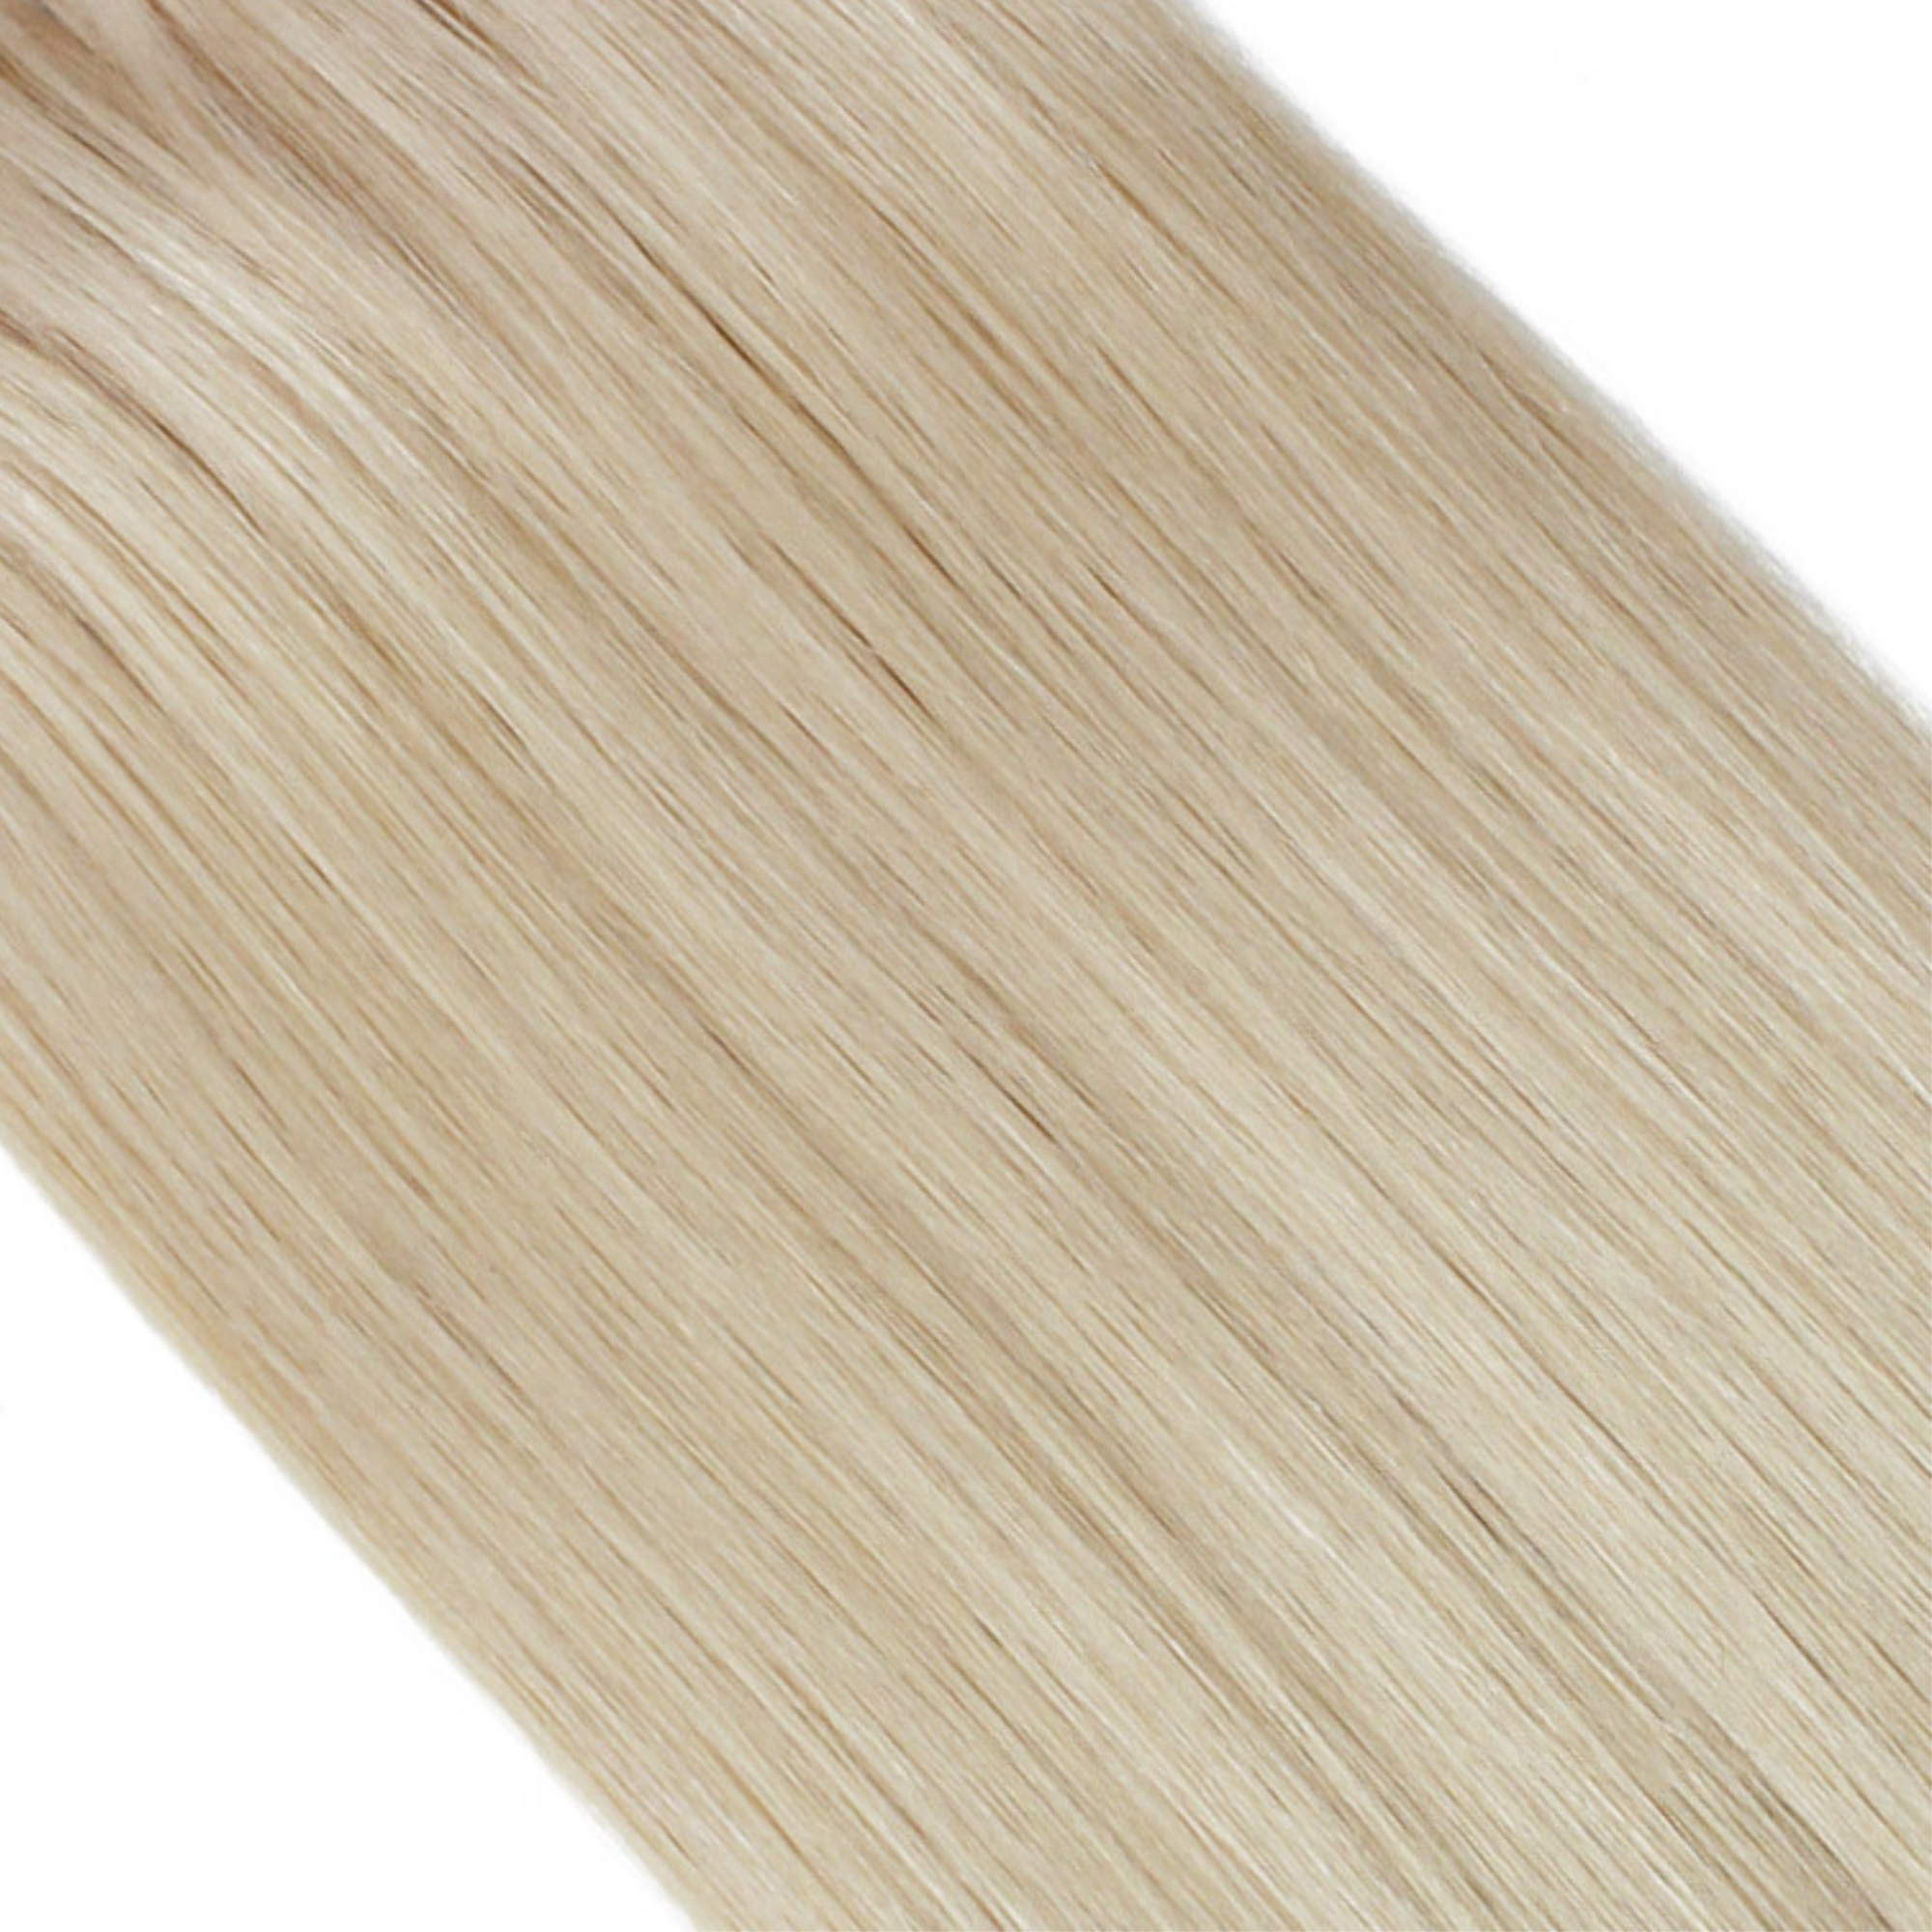 "hair rehab london 18" weft hair extensions shade swatch titled blonde af"